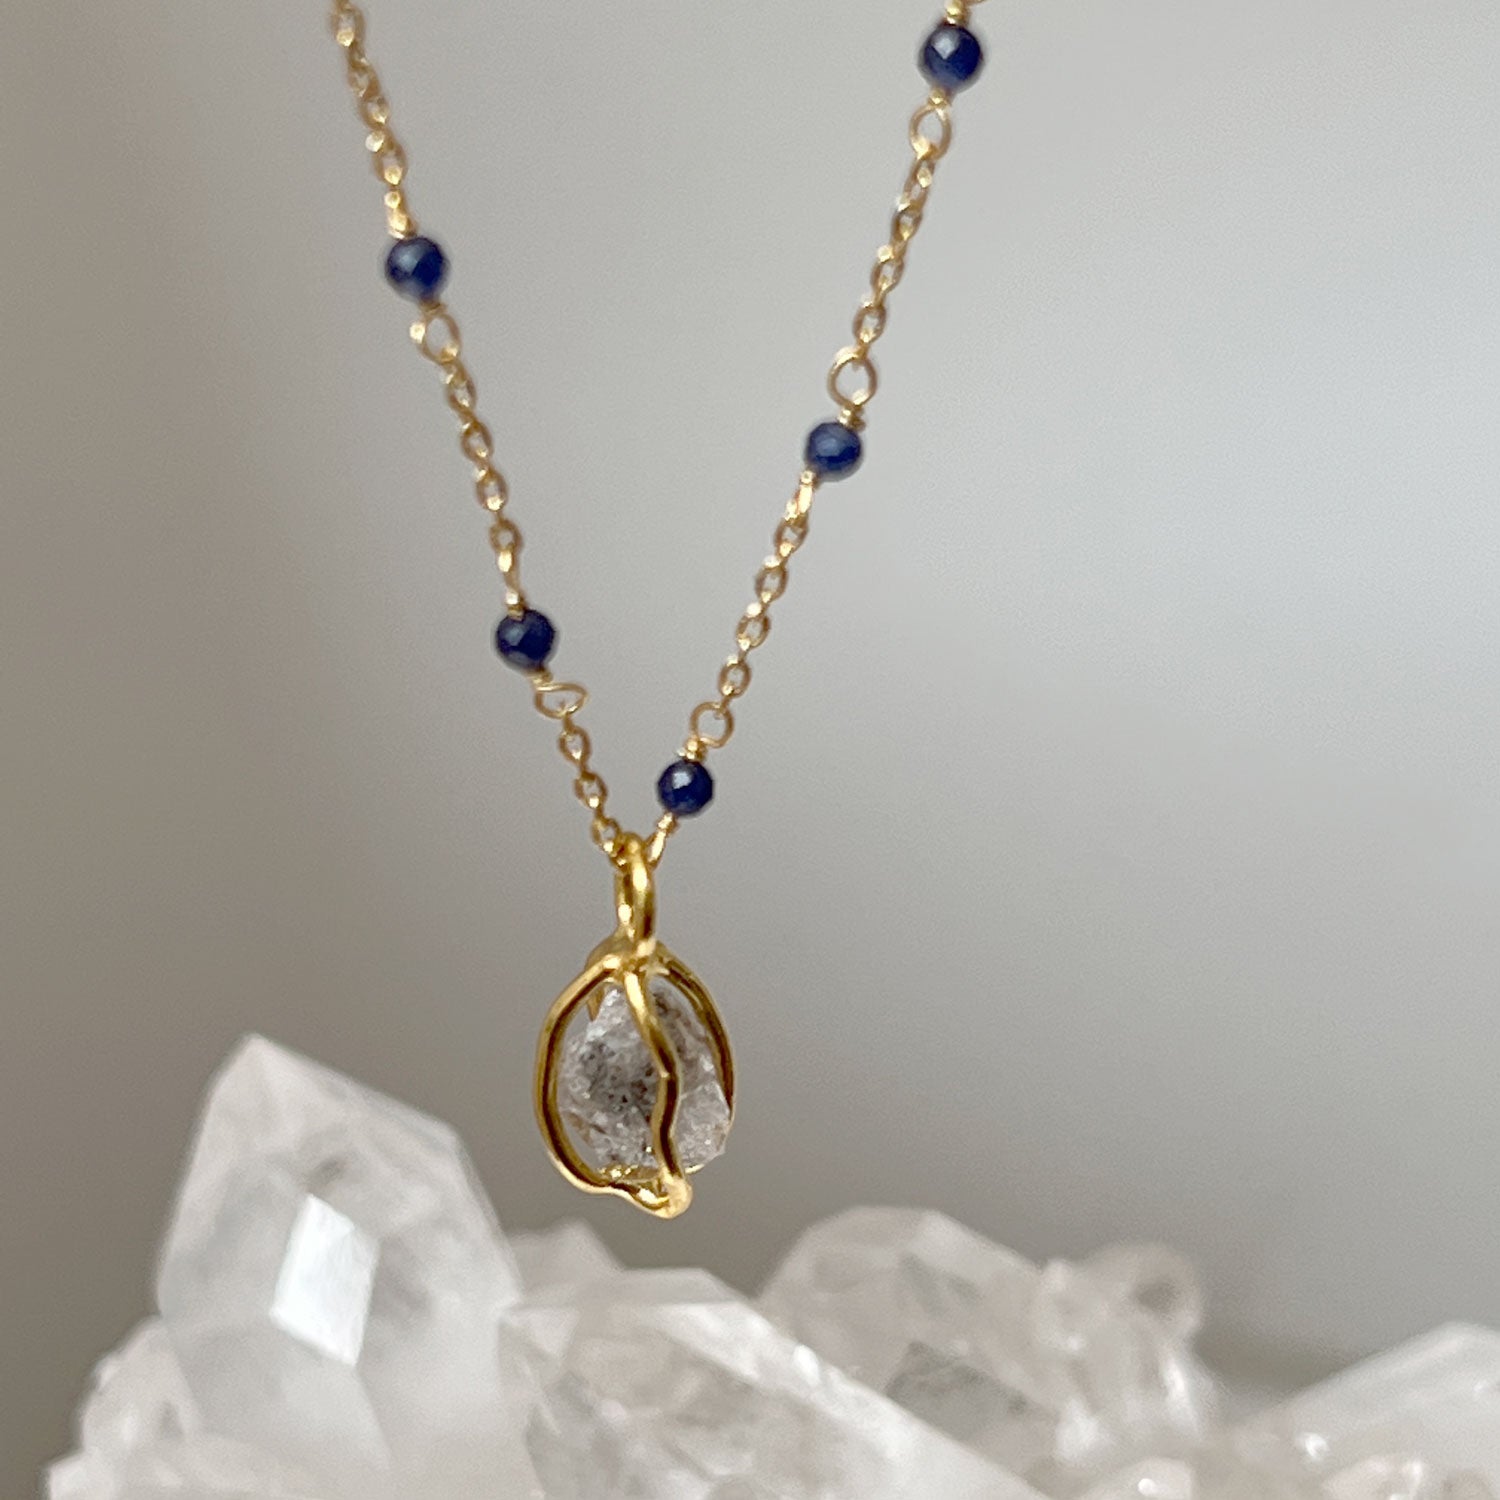 Fancy Sapphire rosary with Herkimer diamond raw in cage pendant